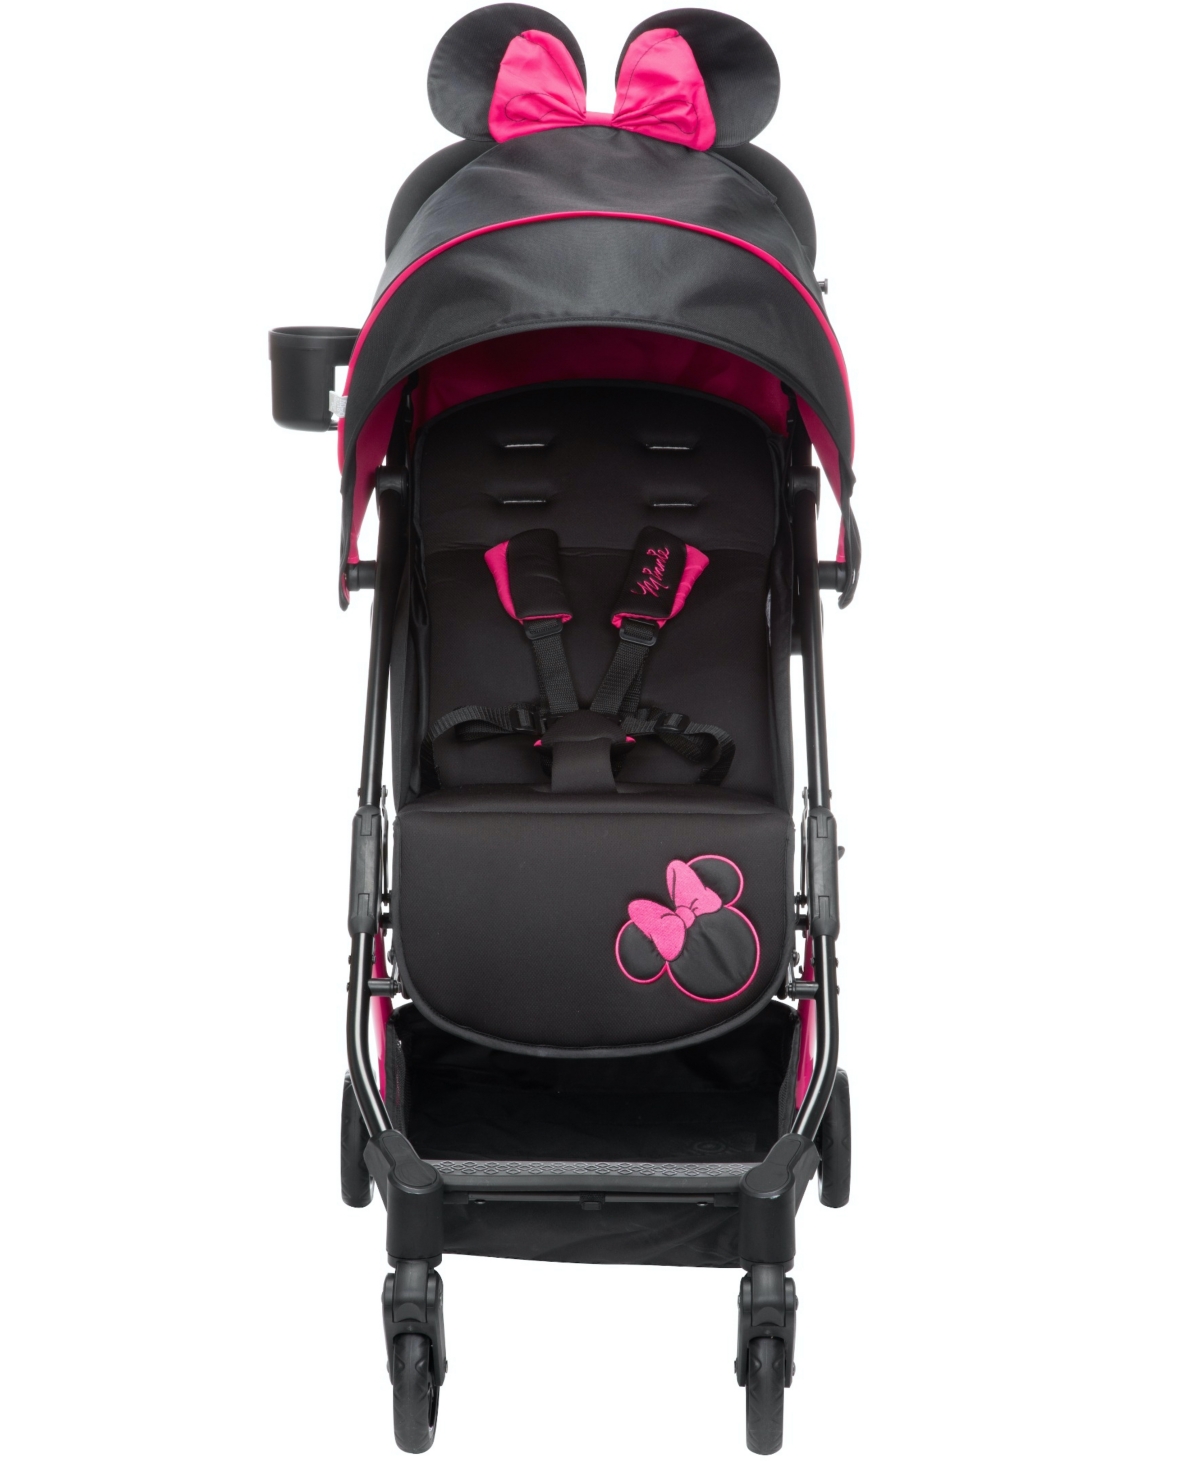 Disney Baby Teeny Ultra Compact Stroller In Let's Go Minnie